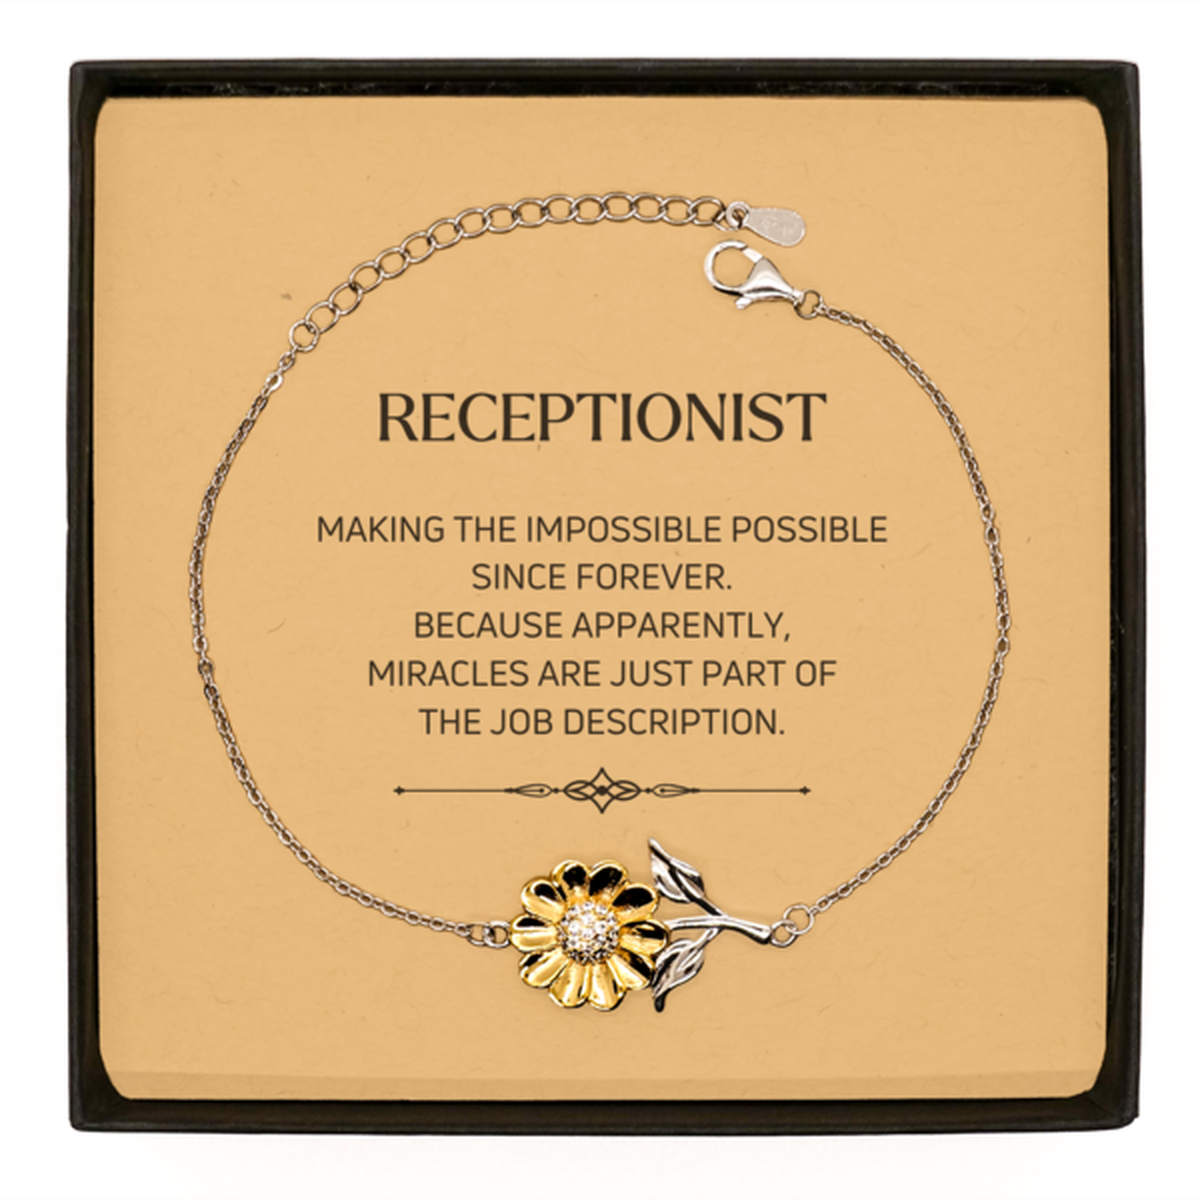 Funny Receptionist Gifts, Miracles are just part of the job description, Inspirational Birthday Sunflower Bracelet For Receptionist, Men, Women, Coworkers, Friends, Boss